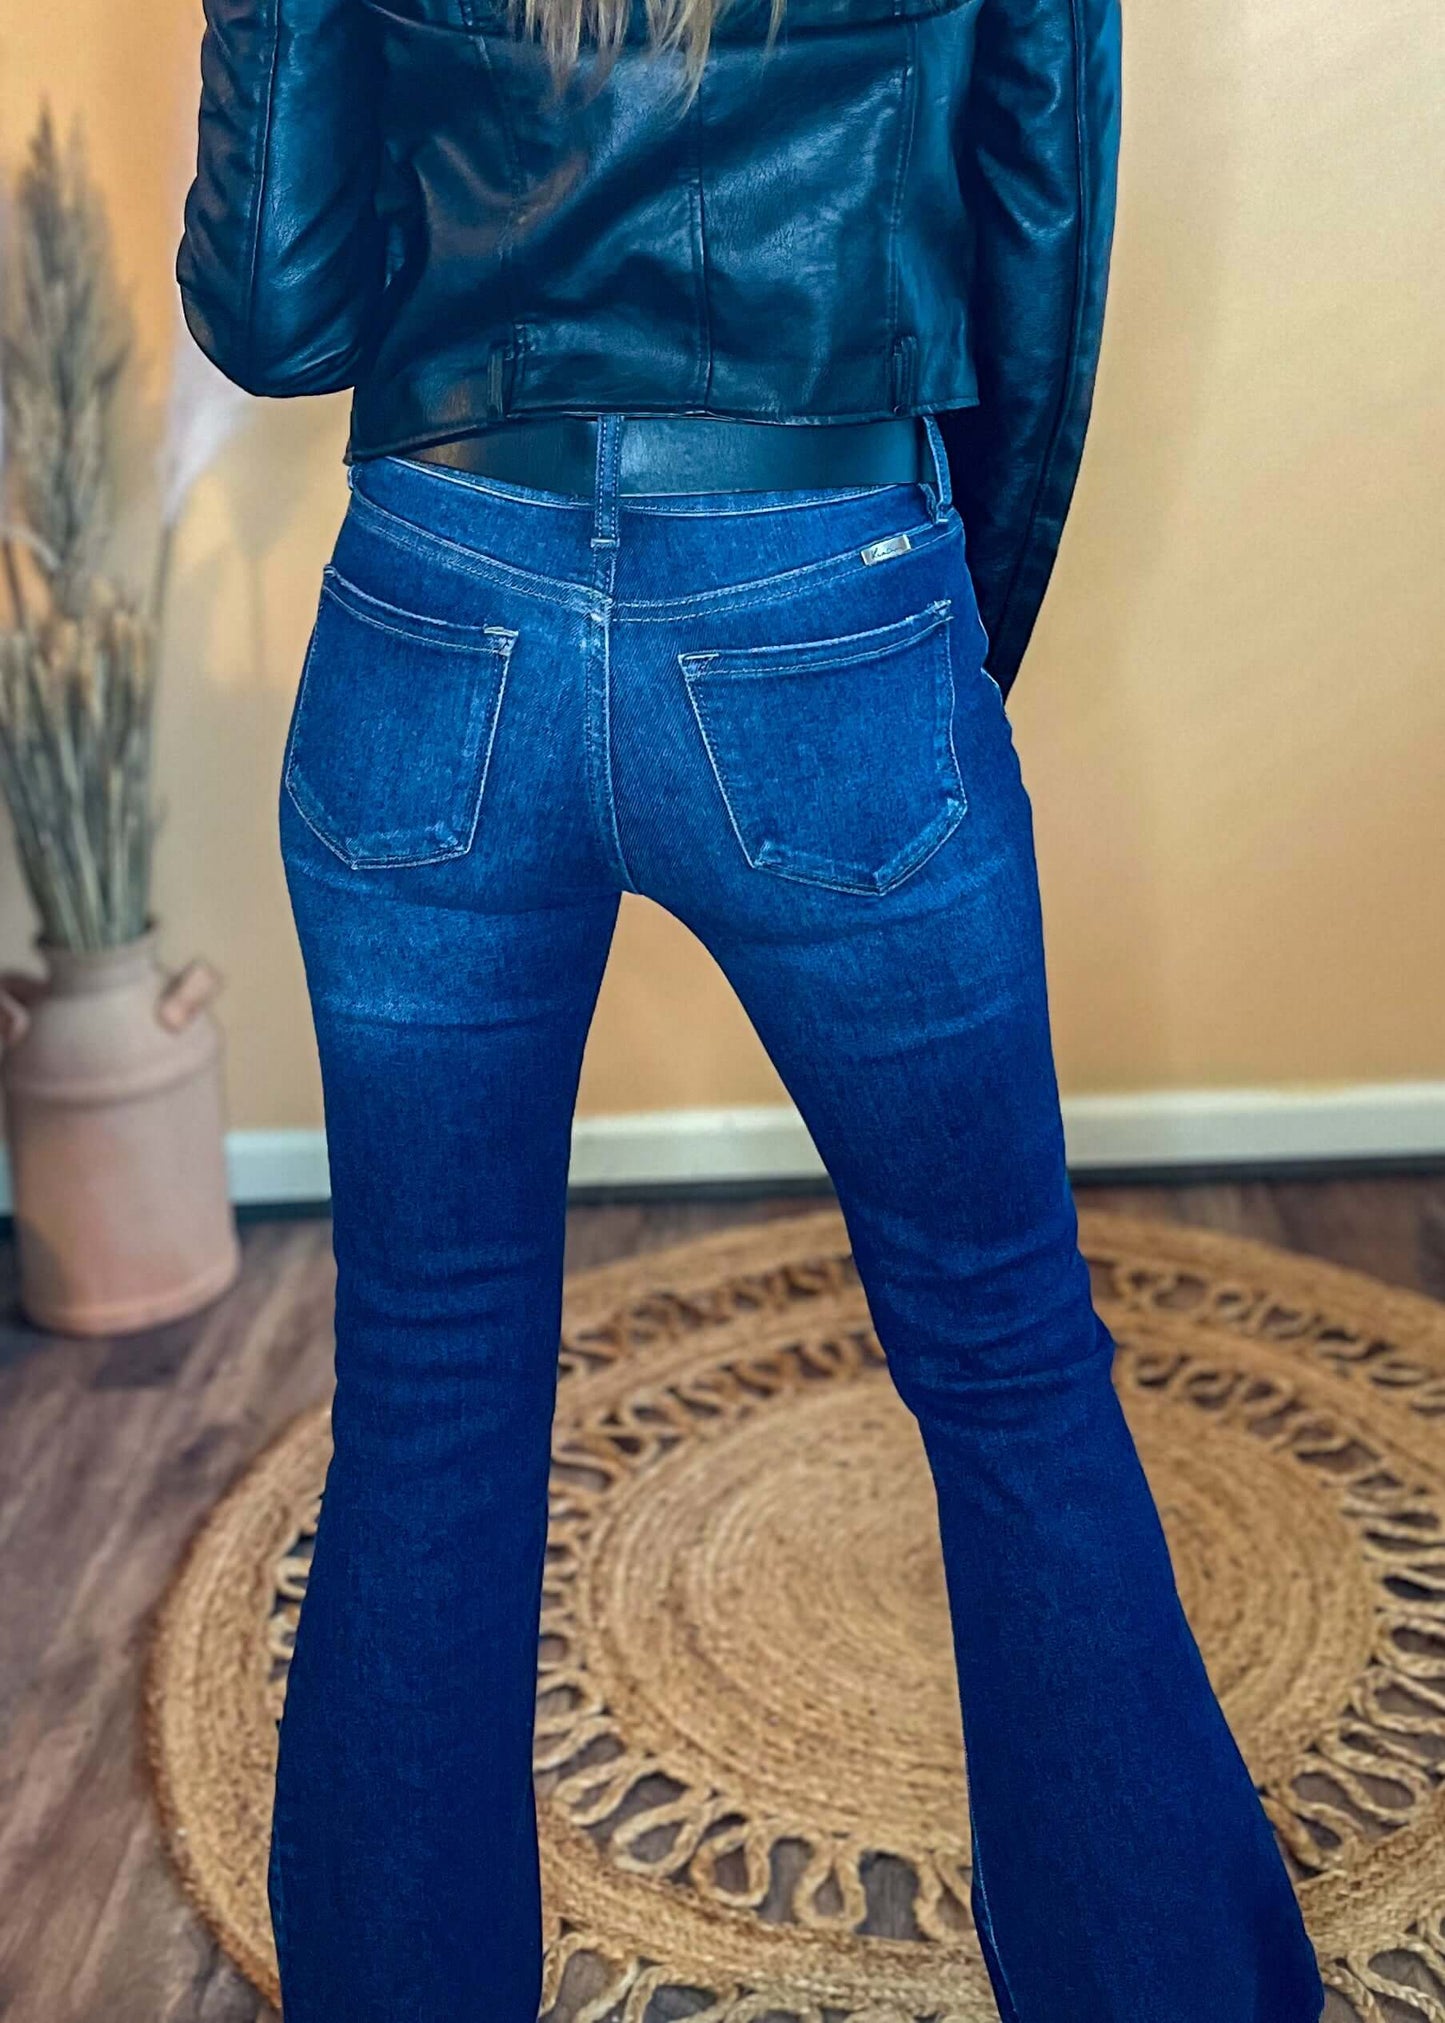 Back view of the jeans, highlighting the fit and flare design from a different angle.